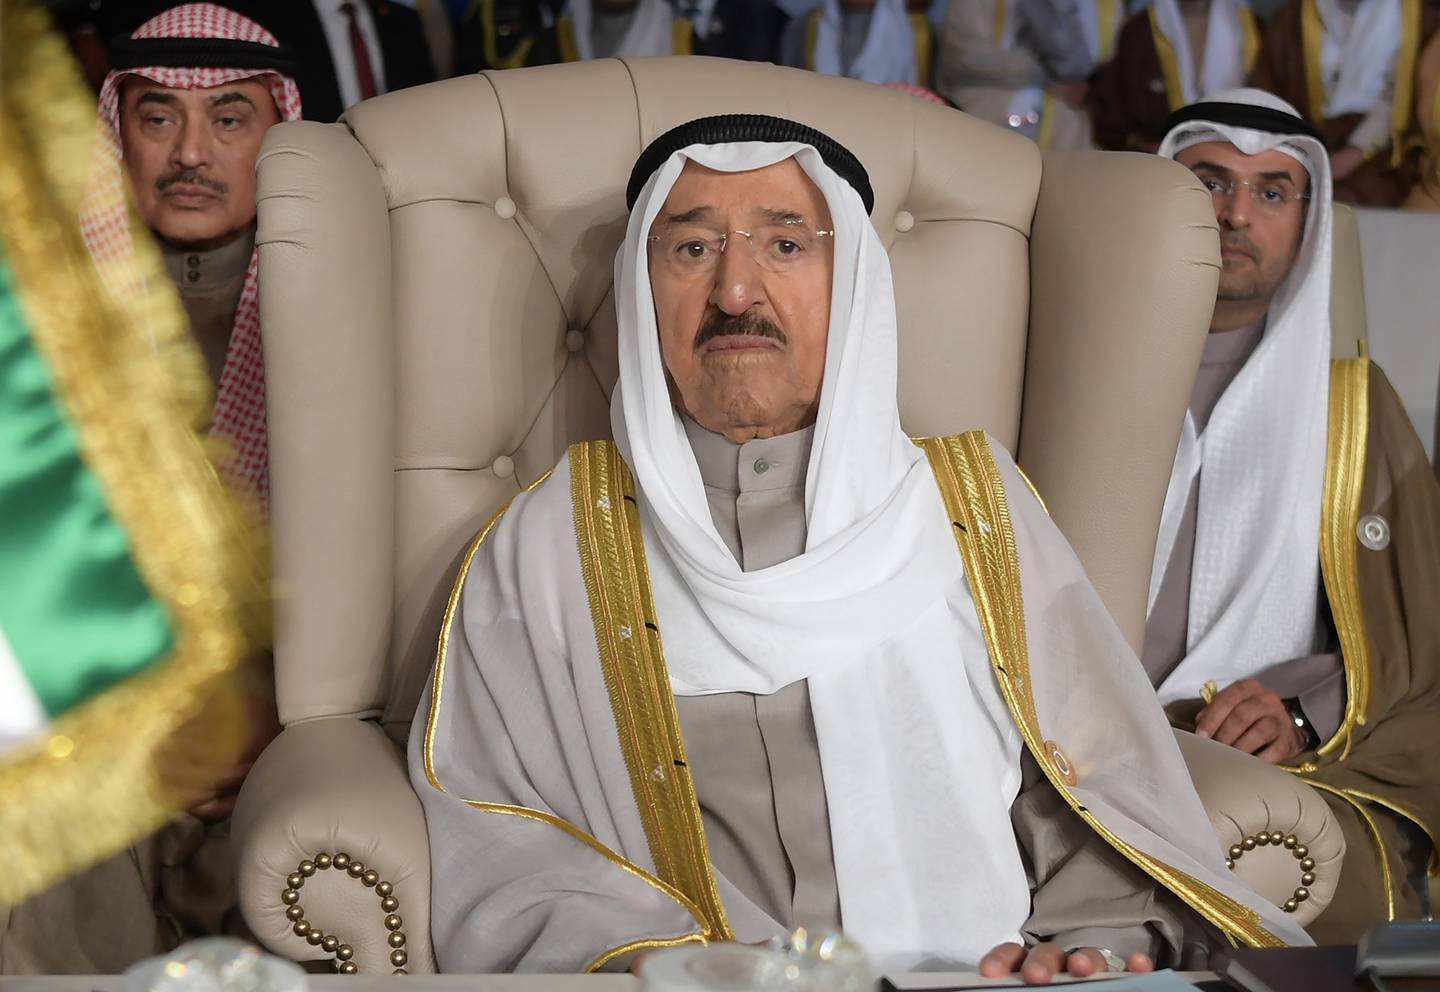 In this March 31, 2019, file photo, Kuwait's ruling emir, Sheikh Sabah Al Ahmad Al Sabah, attends the opening of the 30th Arab Summit, in Tunis, Tunisia.